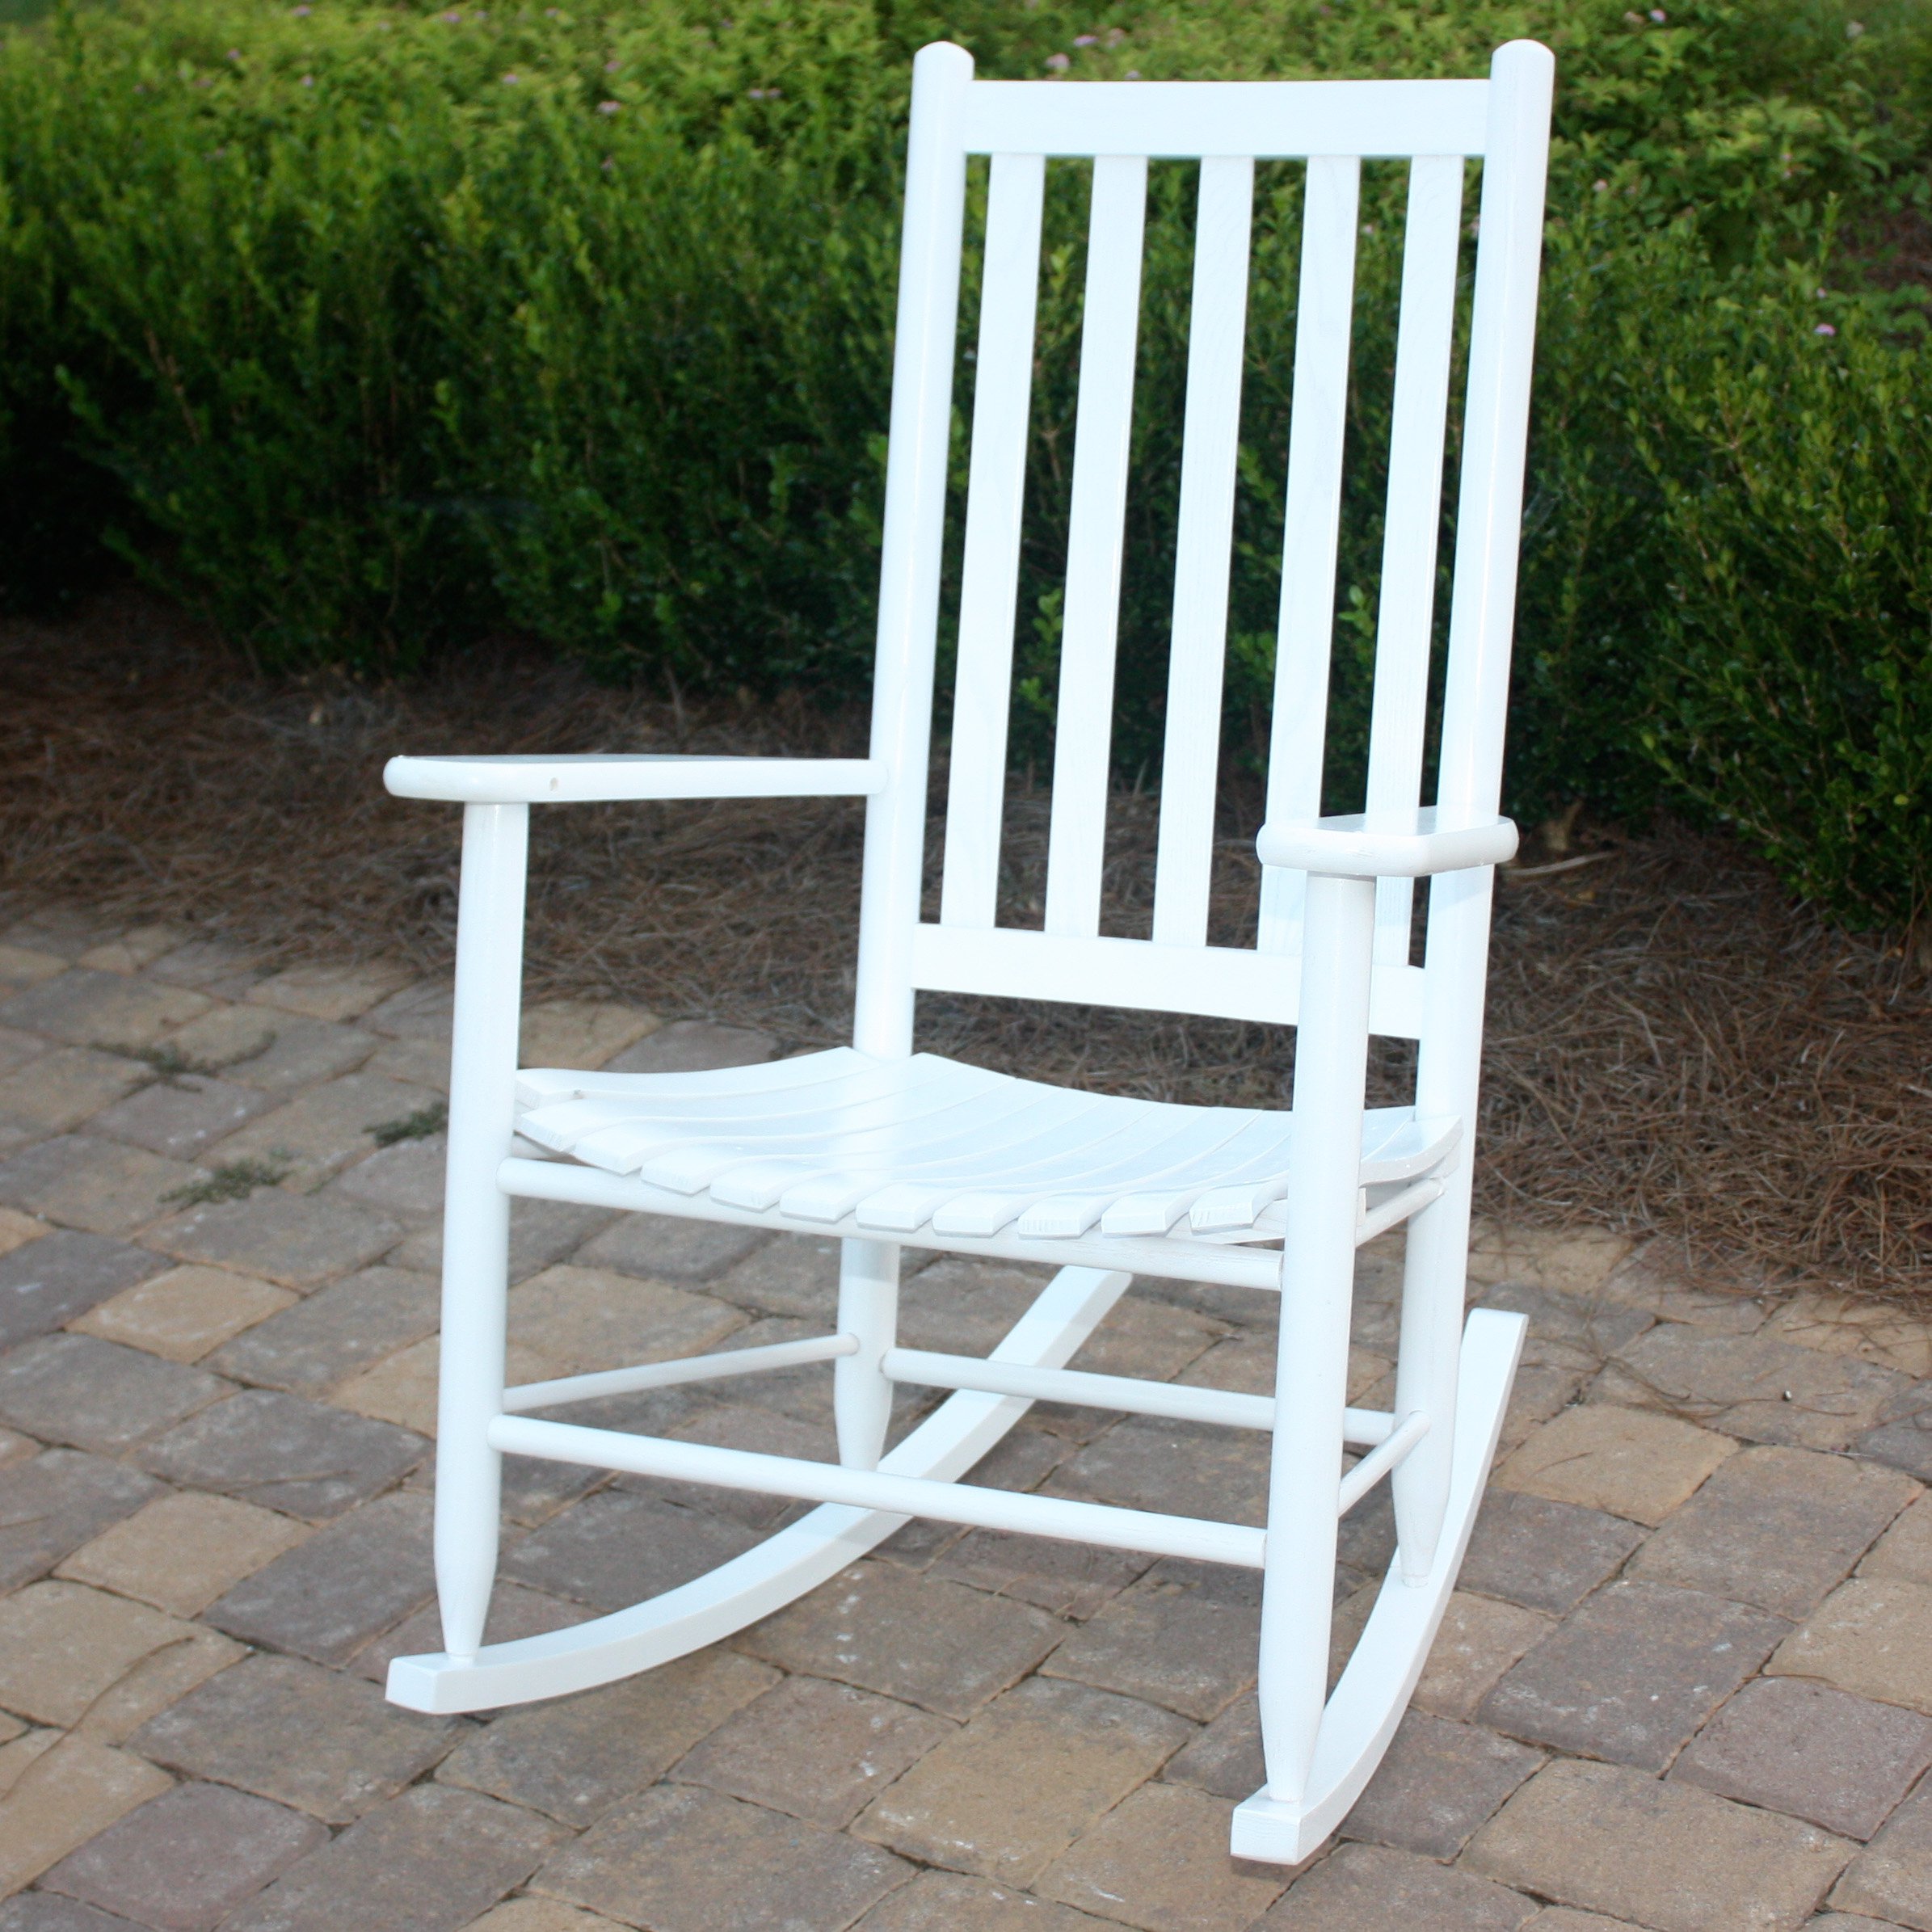 outdoor rocking chair dixie seating georgetown hickory outdoor slat rocking chair | hayneedle YUCSWKV